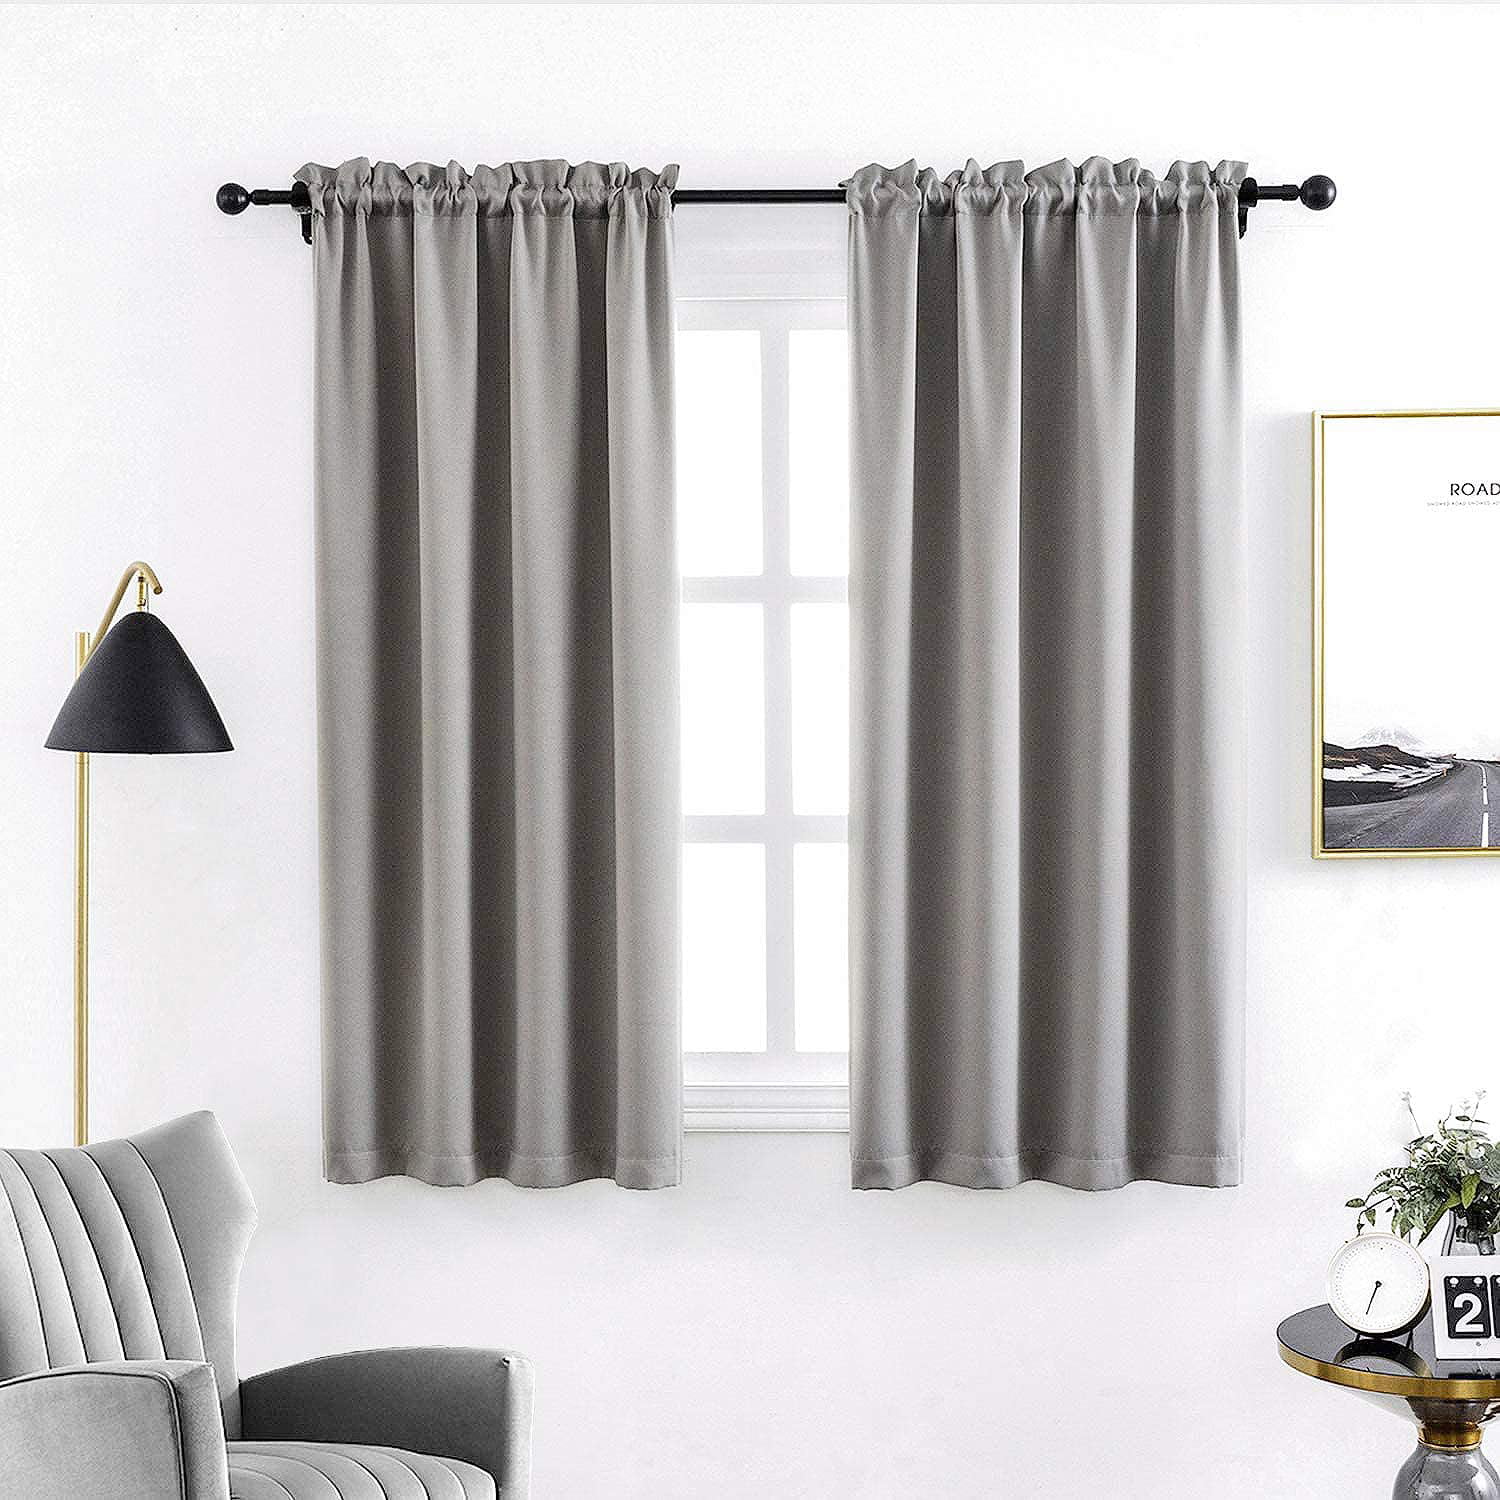 Blackout Curtains for Bedroom 45 Inches Length Grey Solid Plain Window